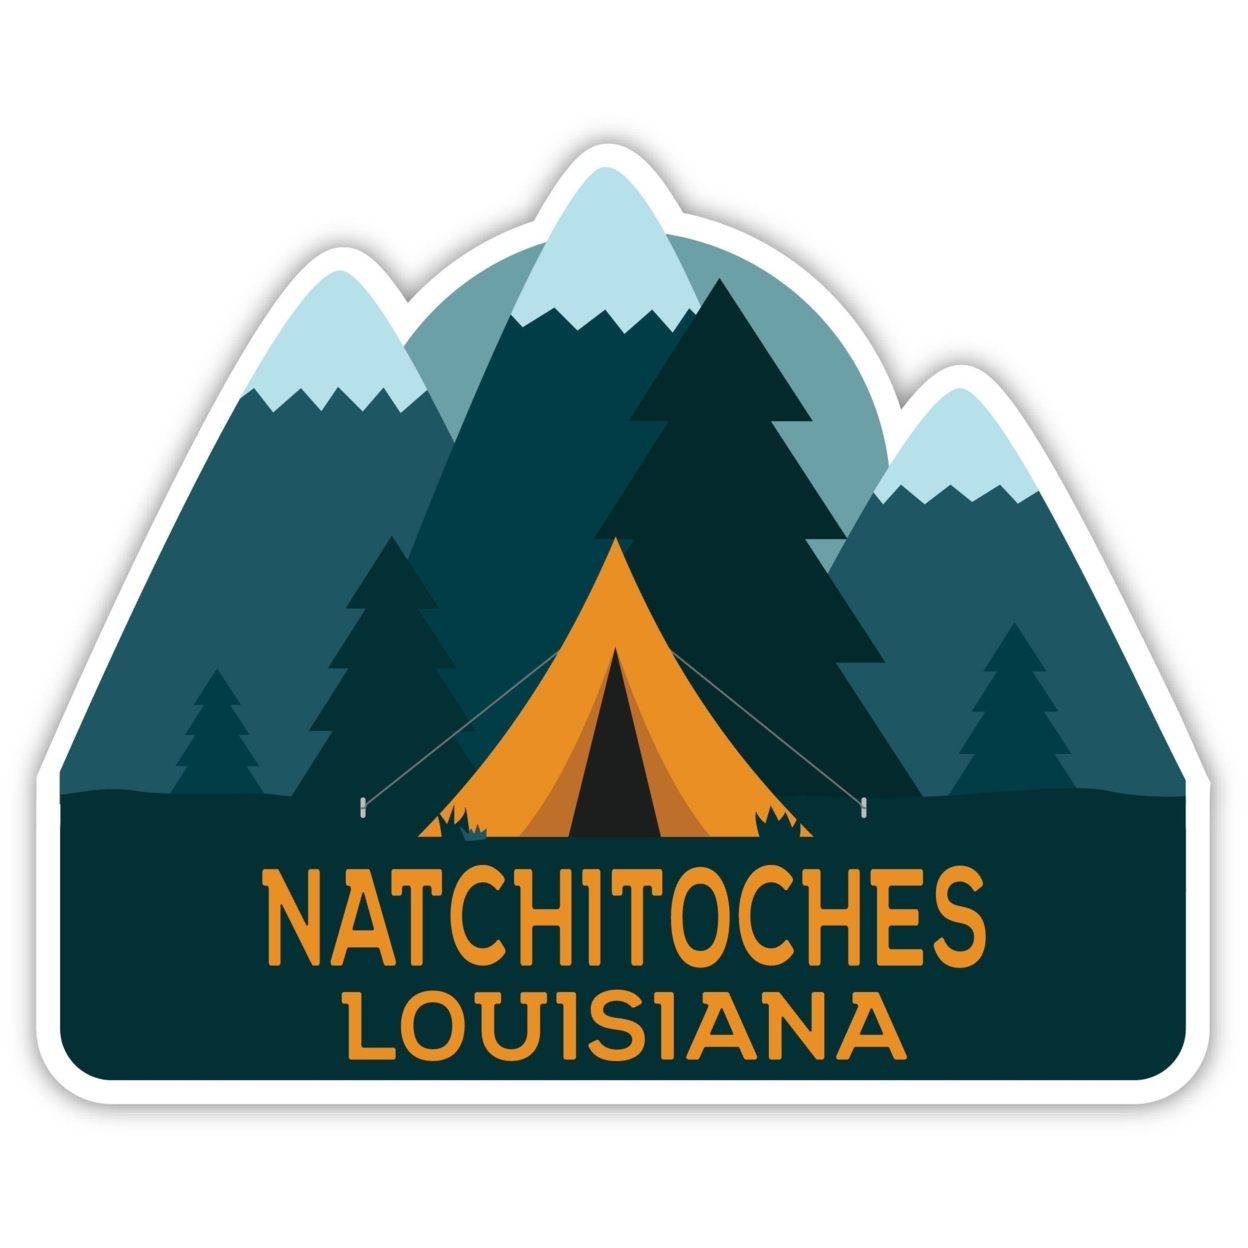 Natchitoches Louisiana Souvenir Decorative Stickers (Choose Theme And Size) - Single Unit, 4-Inch, Camp Life